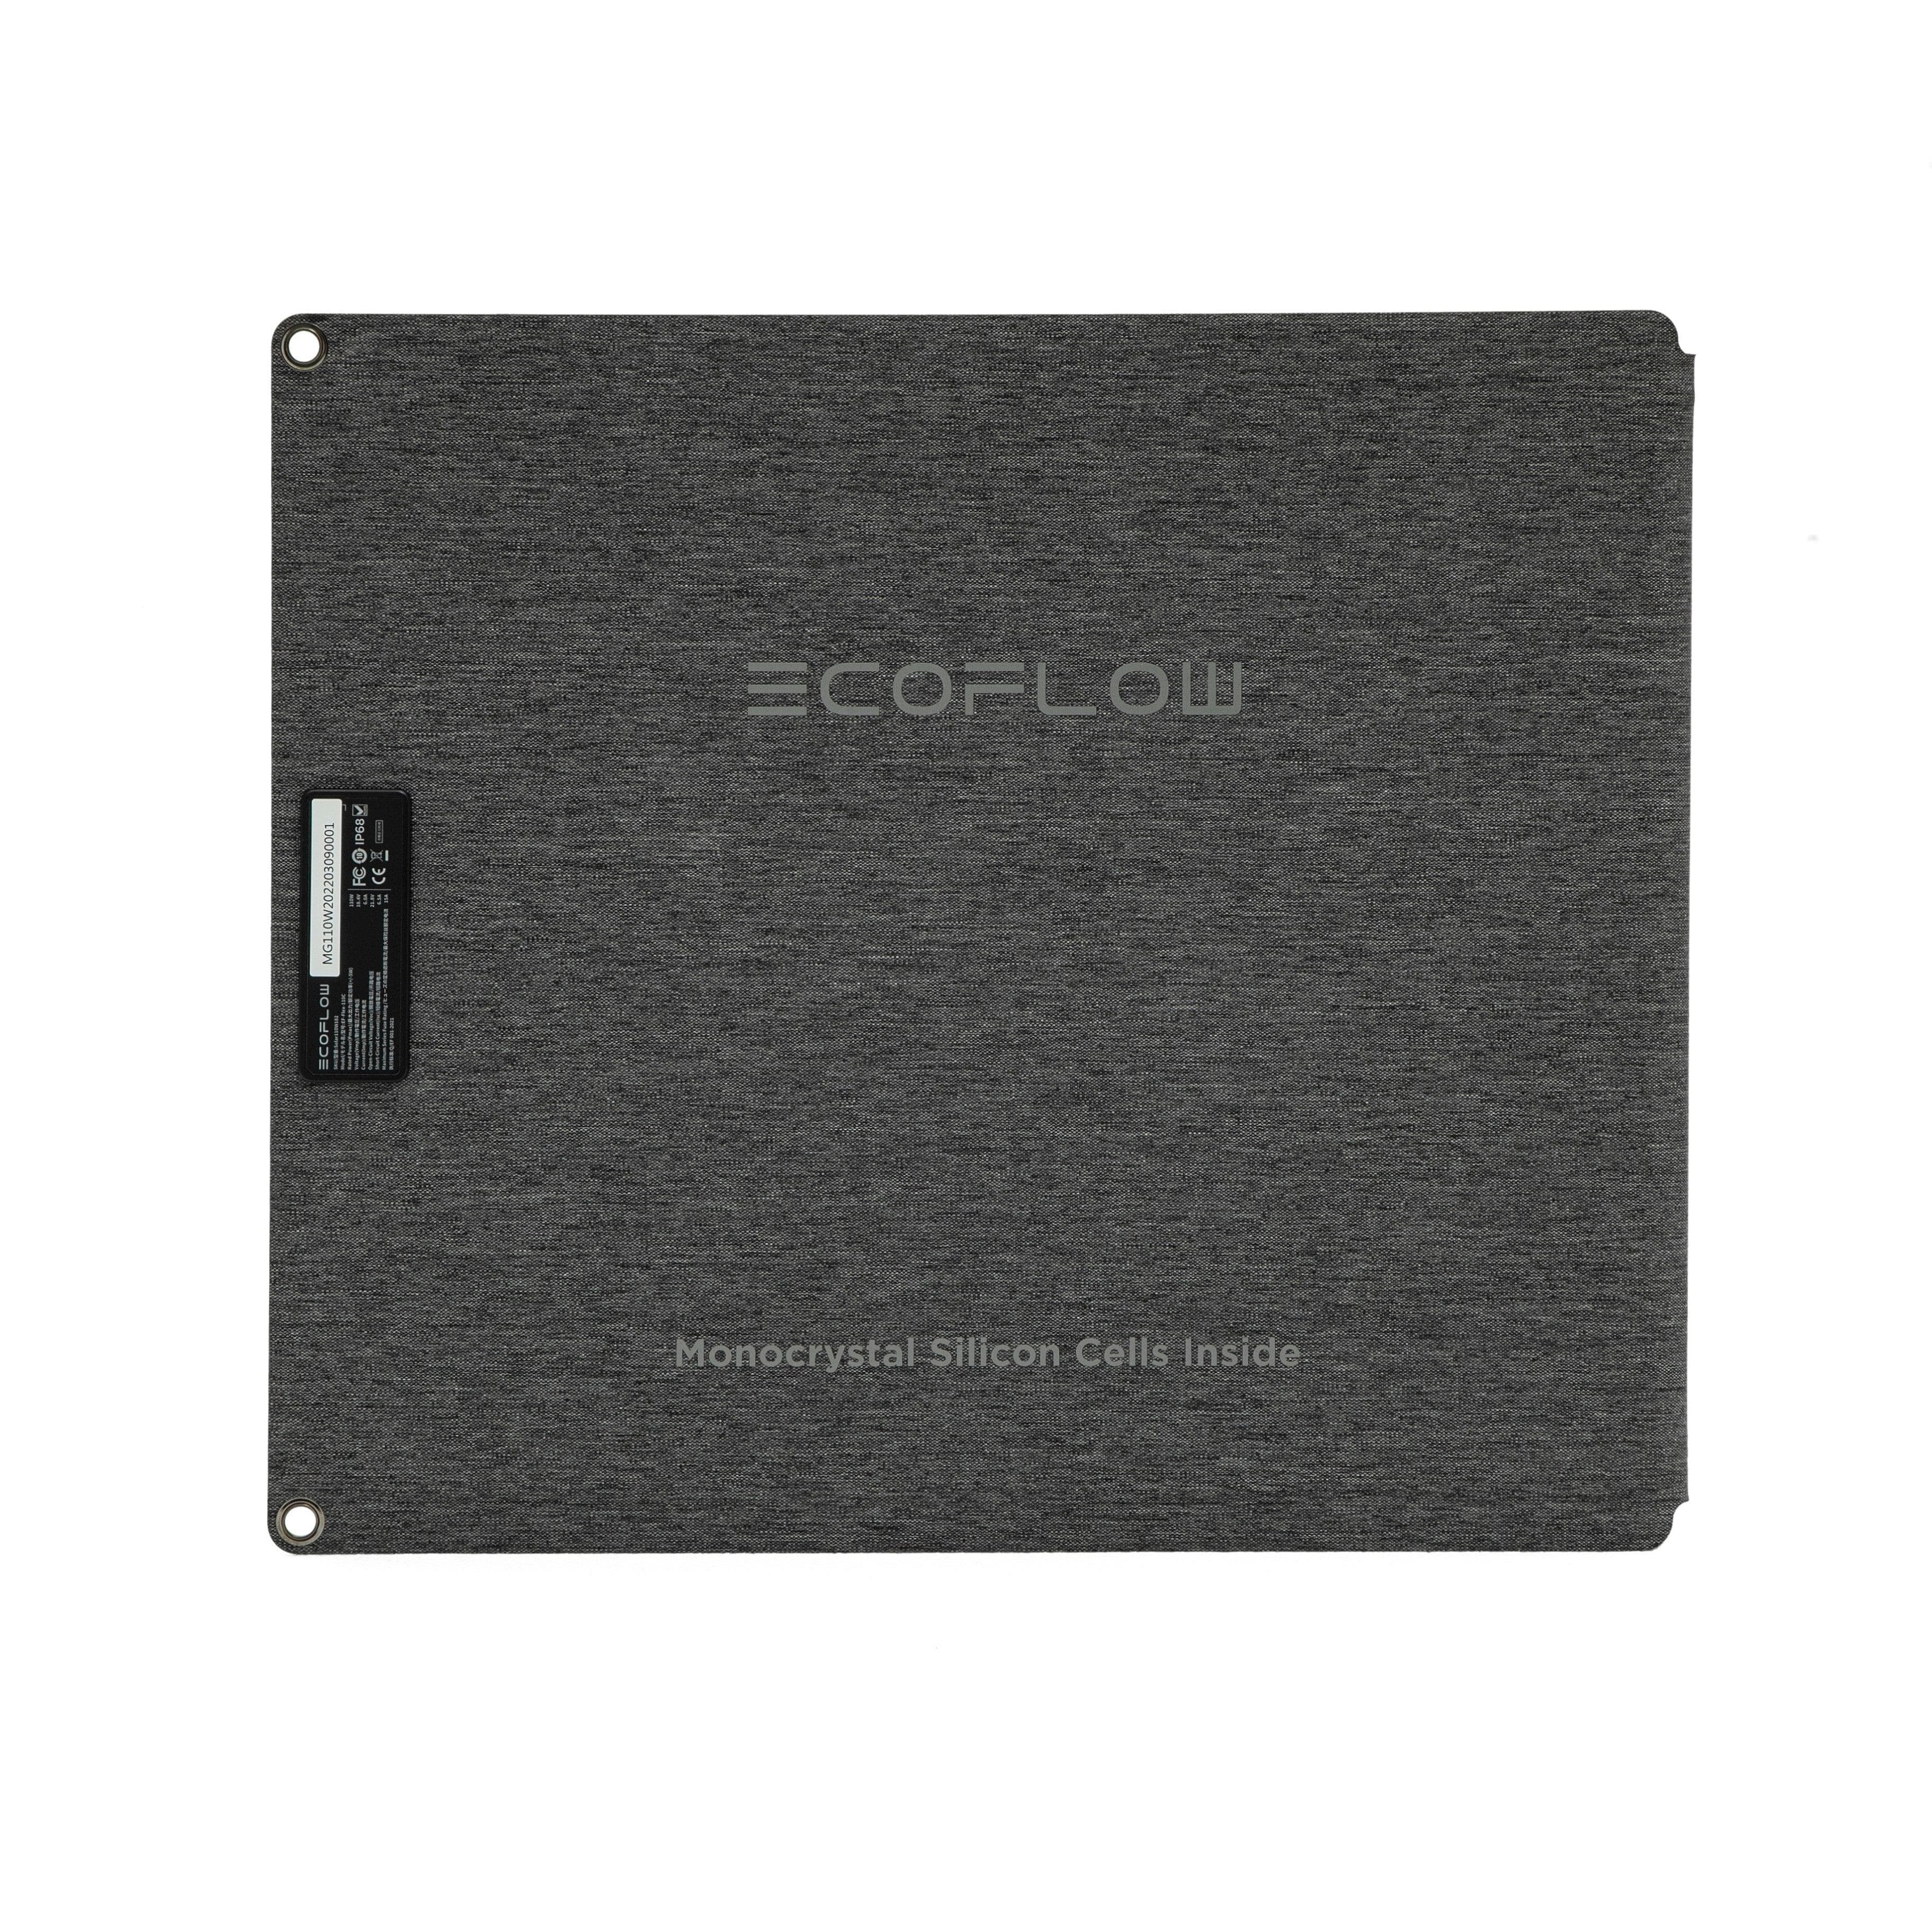 EcoFlow EcoFlow 110W Solar Panel (Recommended Accessory) Giving Back 110W